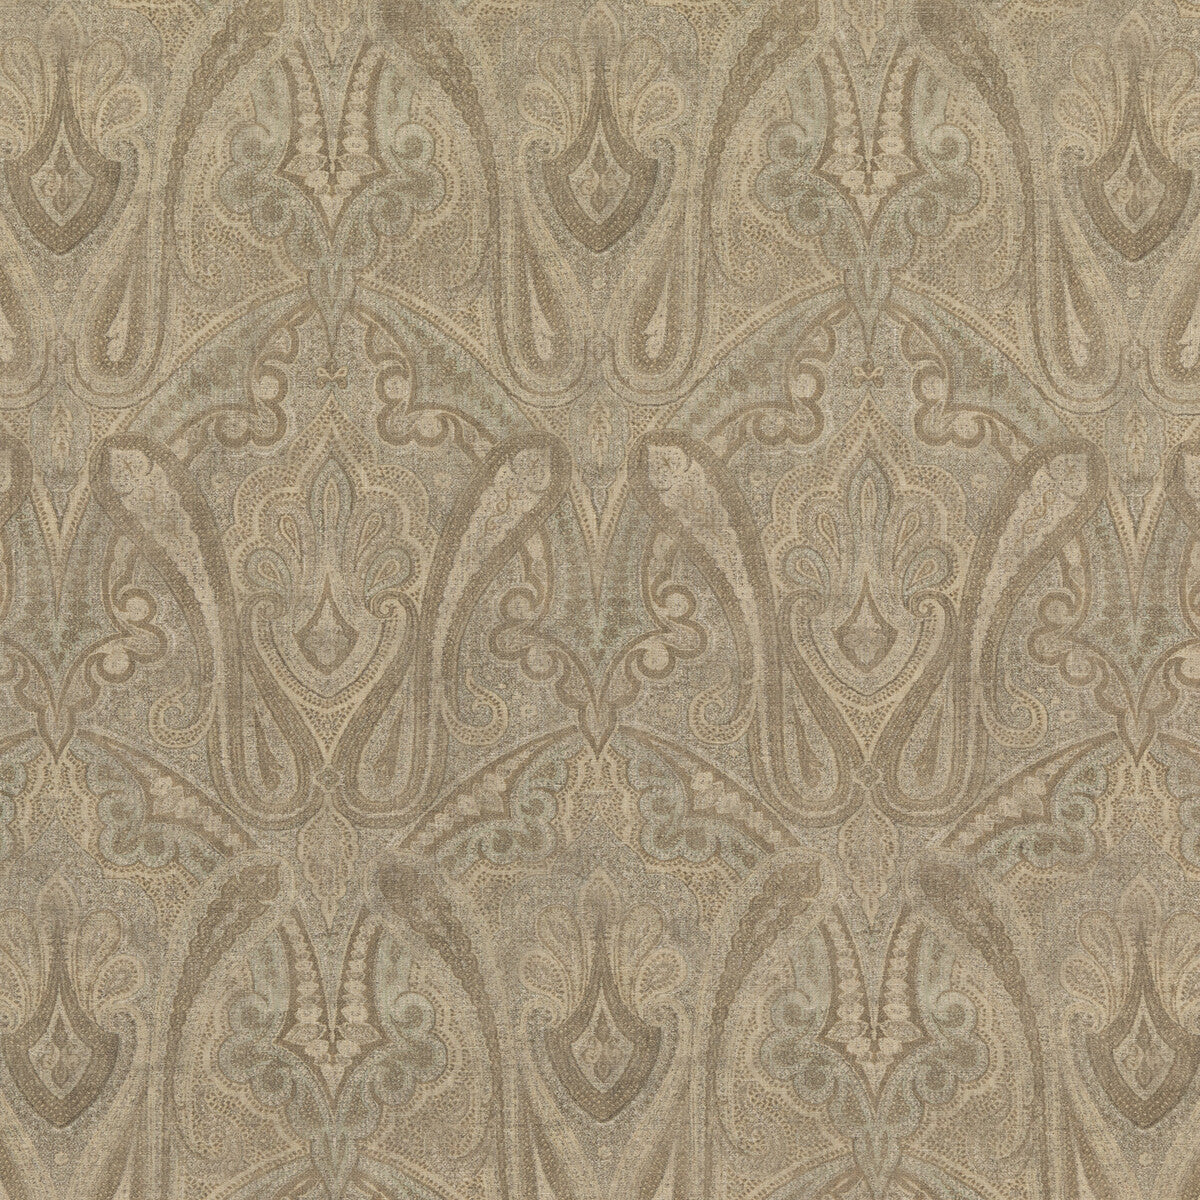 Canvas Paisley fabric in mineral color - pattern FD307.S40.0 - by Mulberry in the Modern Country II collection